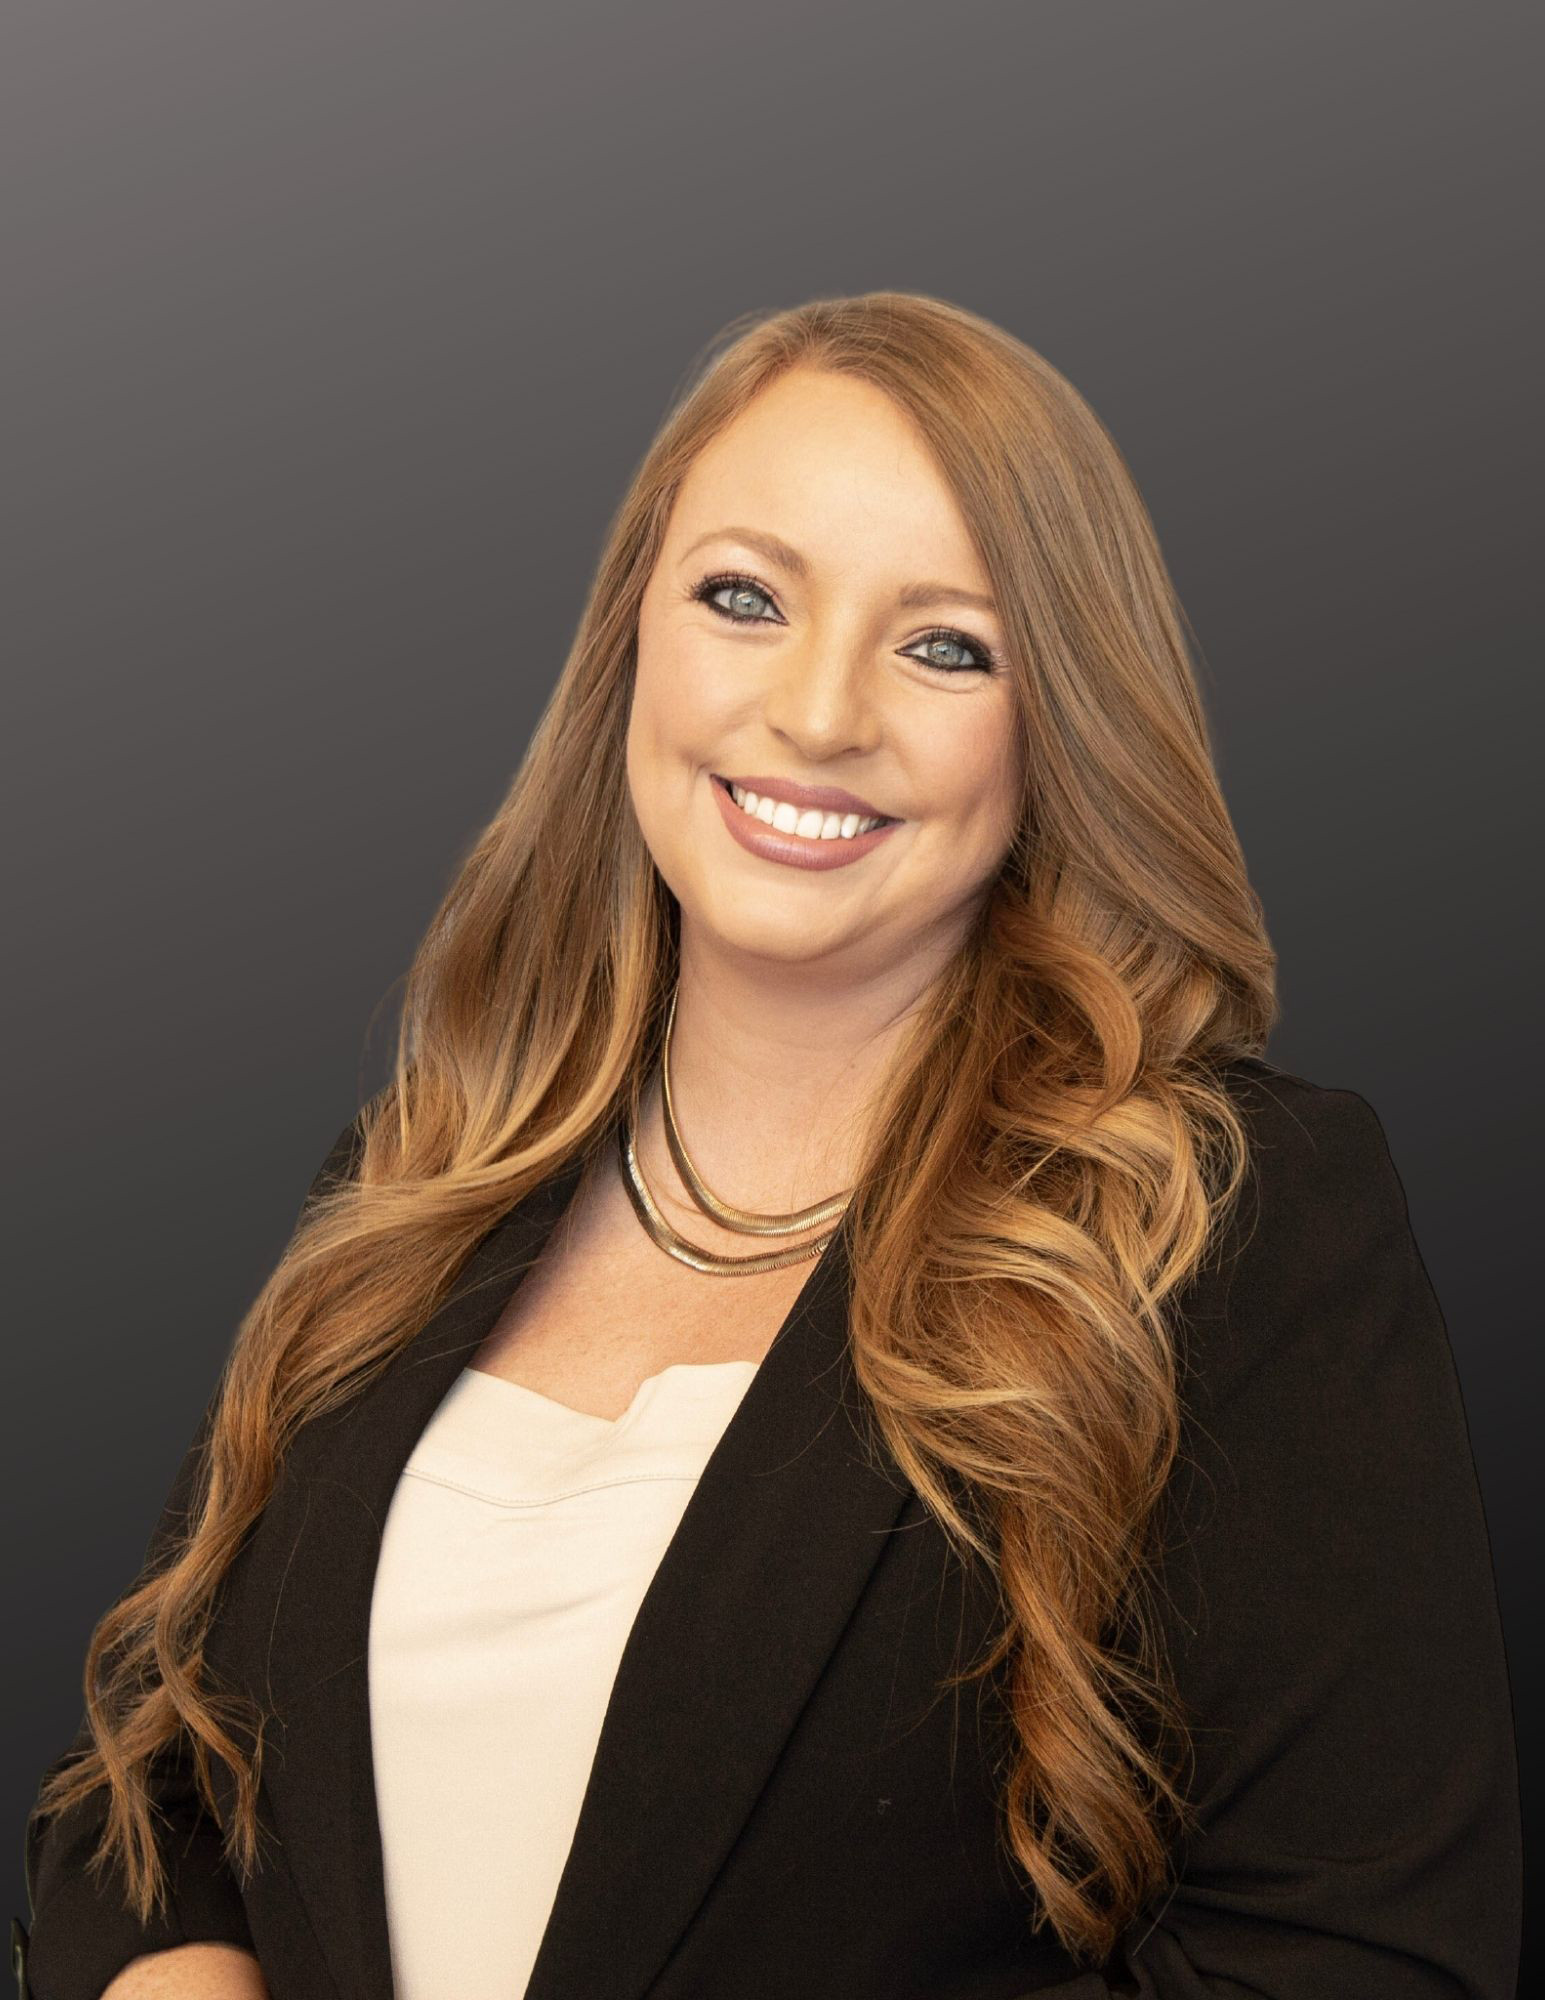 This is a photo of BRANDIE PRICE. This professional services PALATKA, FL 32177 and the surrounding areas.